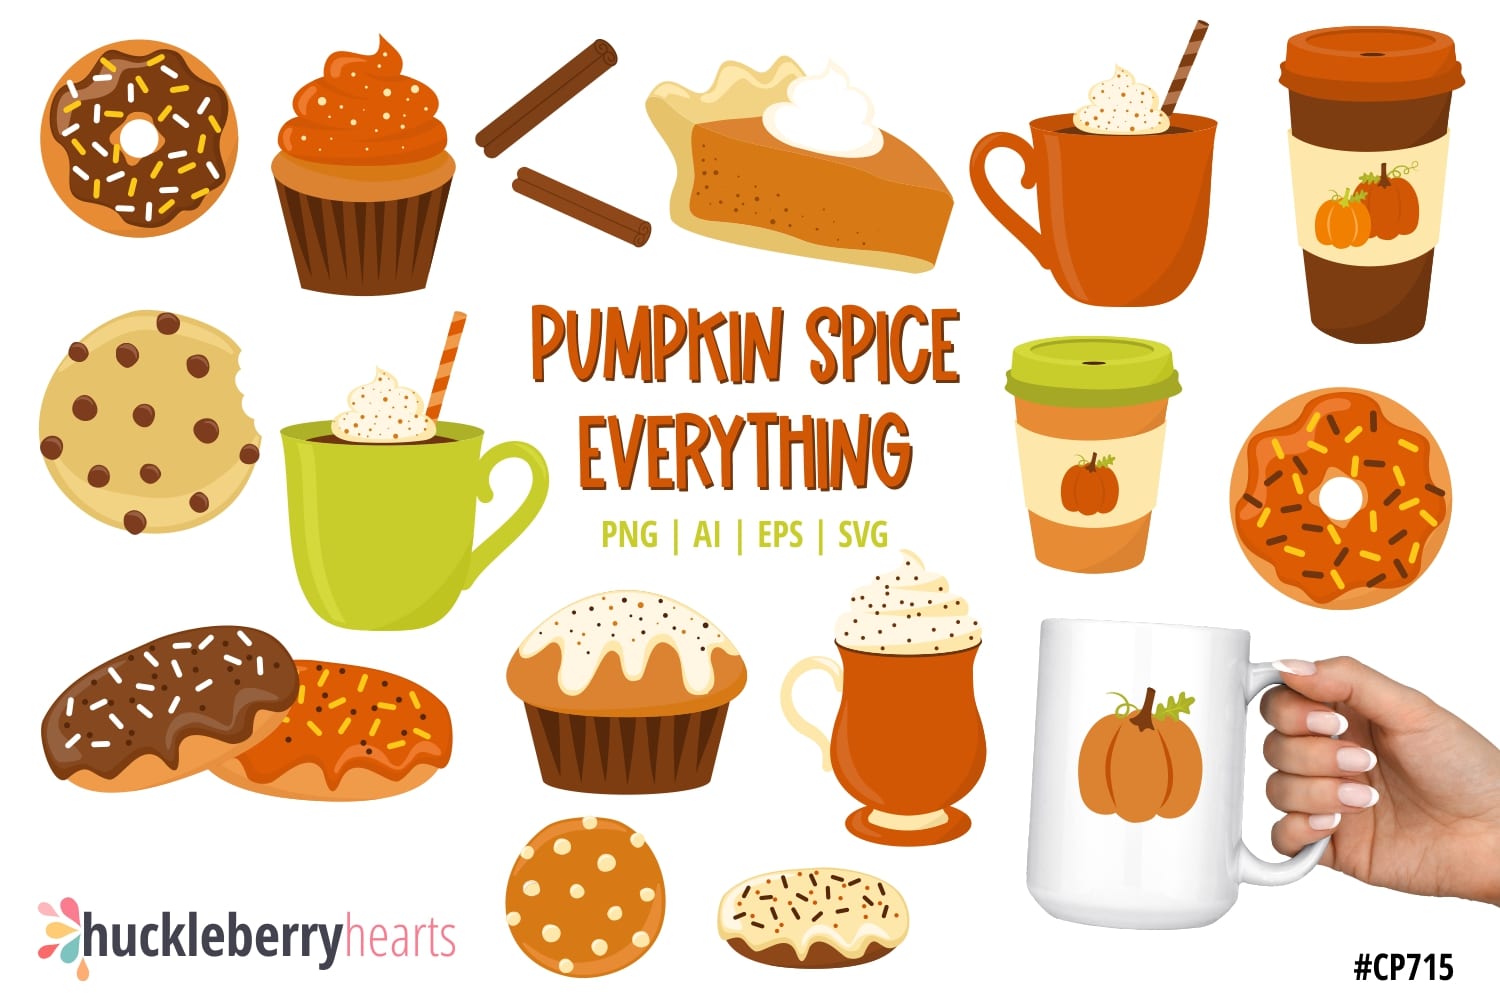 Assorted Pumpkin Spice themed clipart and vectors